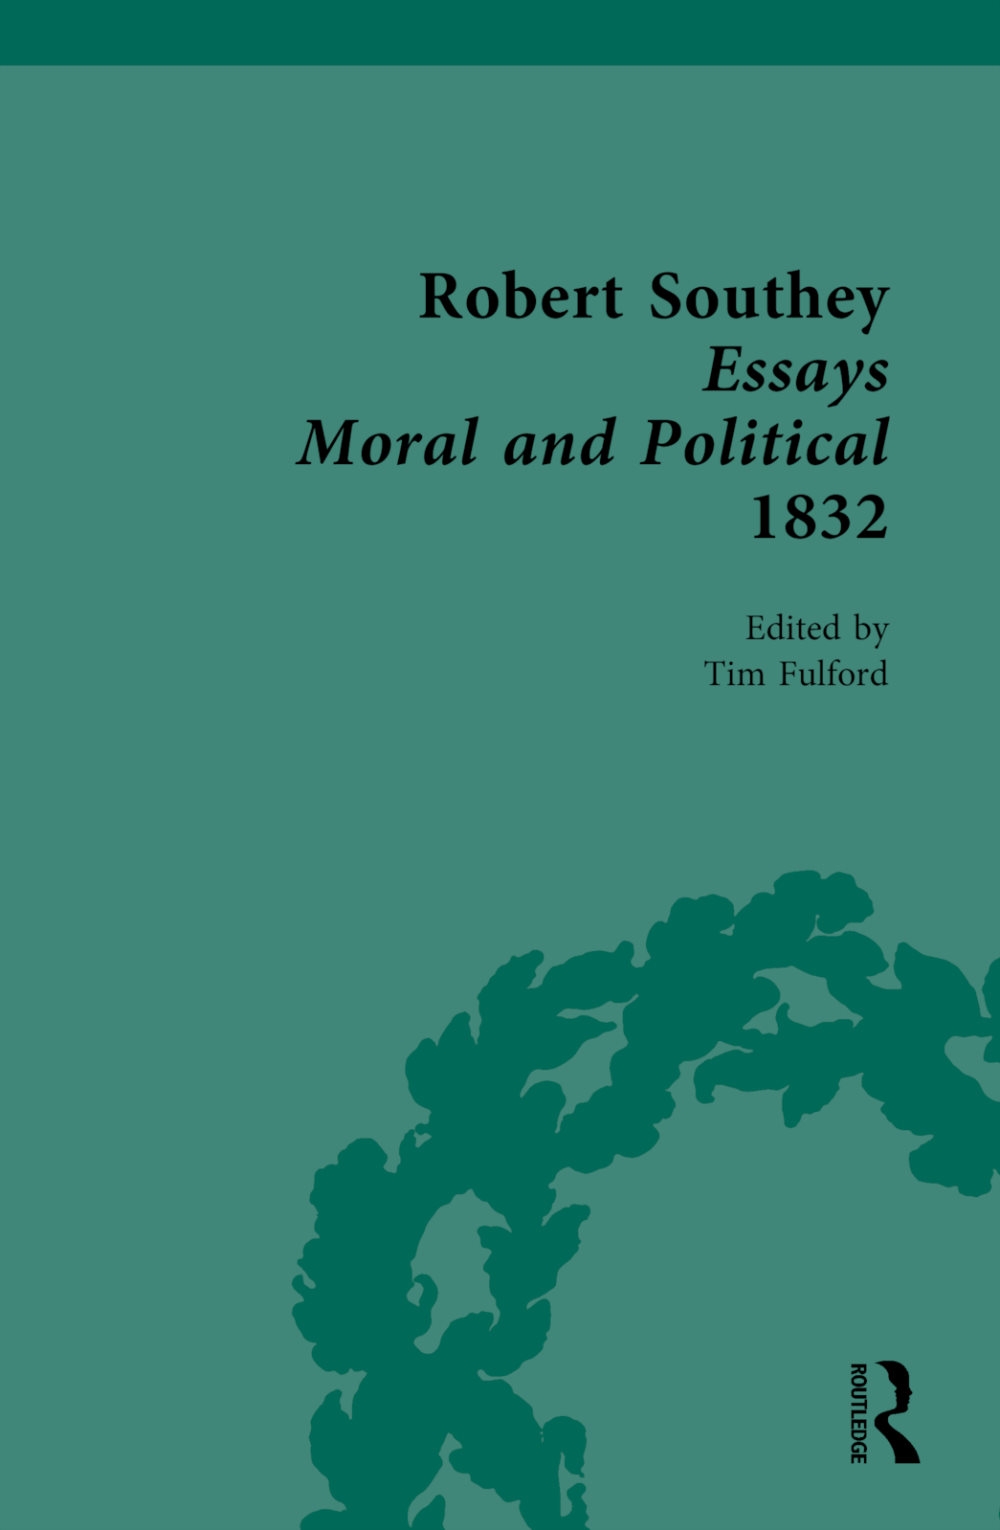 Robert Southey, Essays Moral and Political (1832)